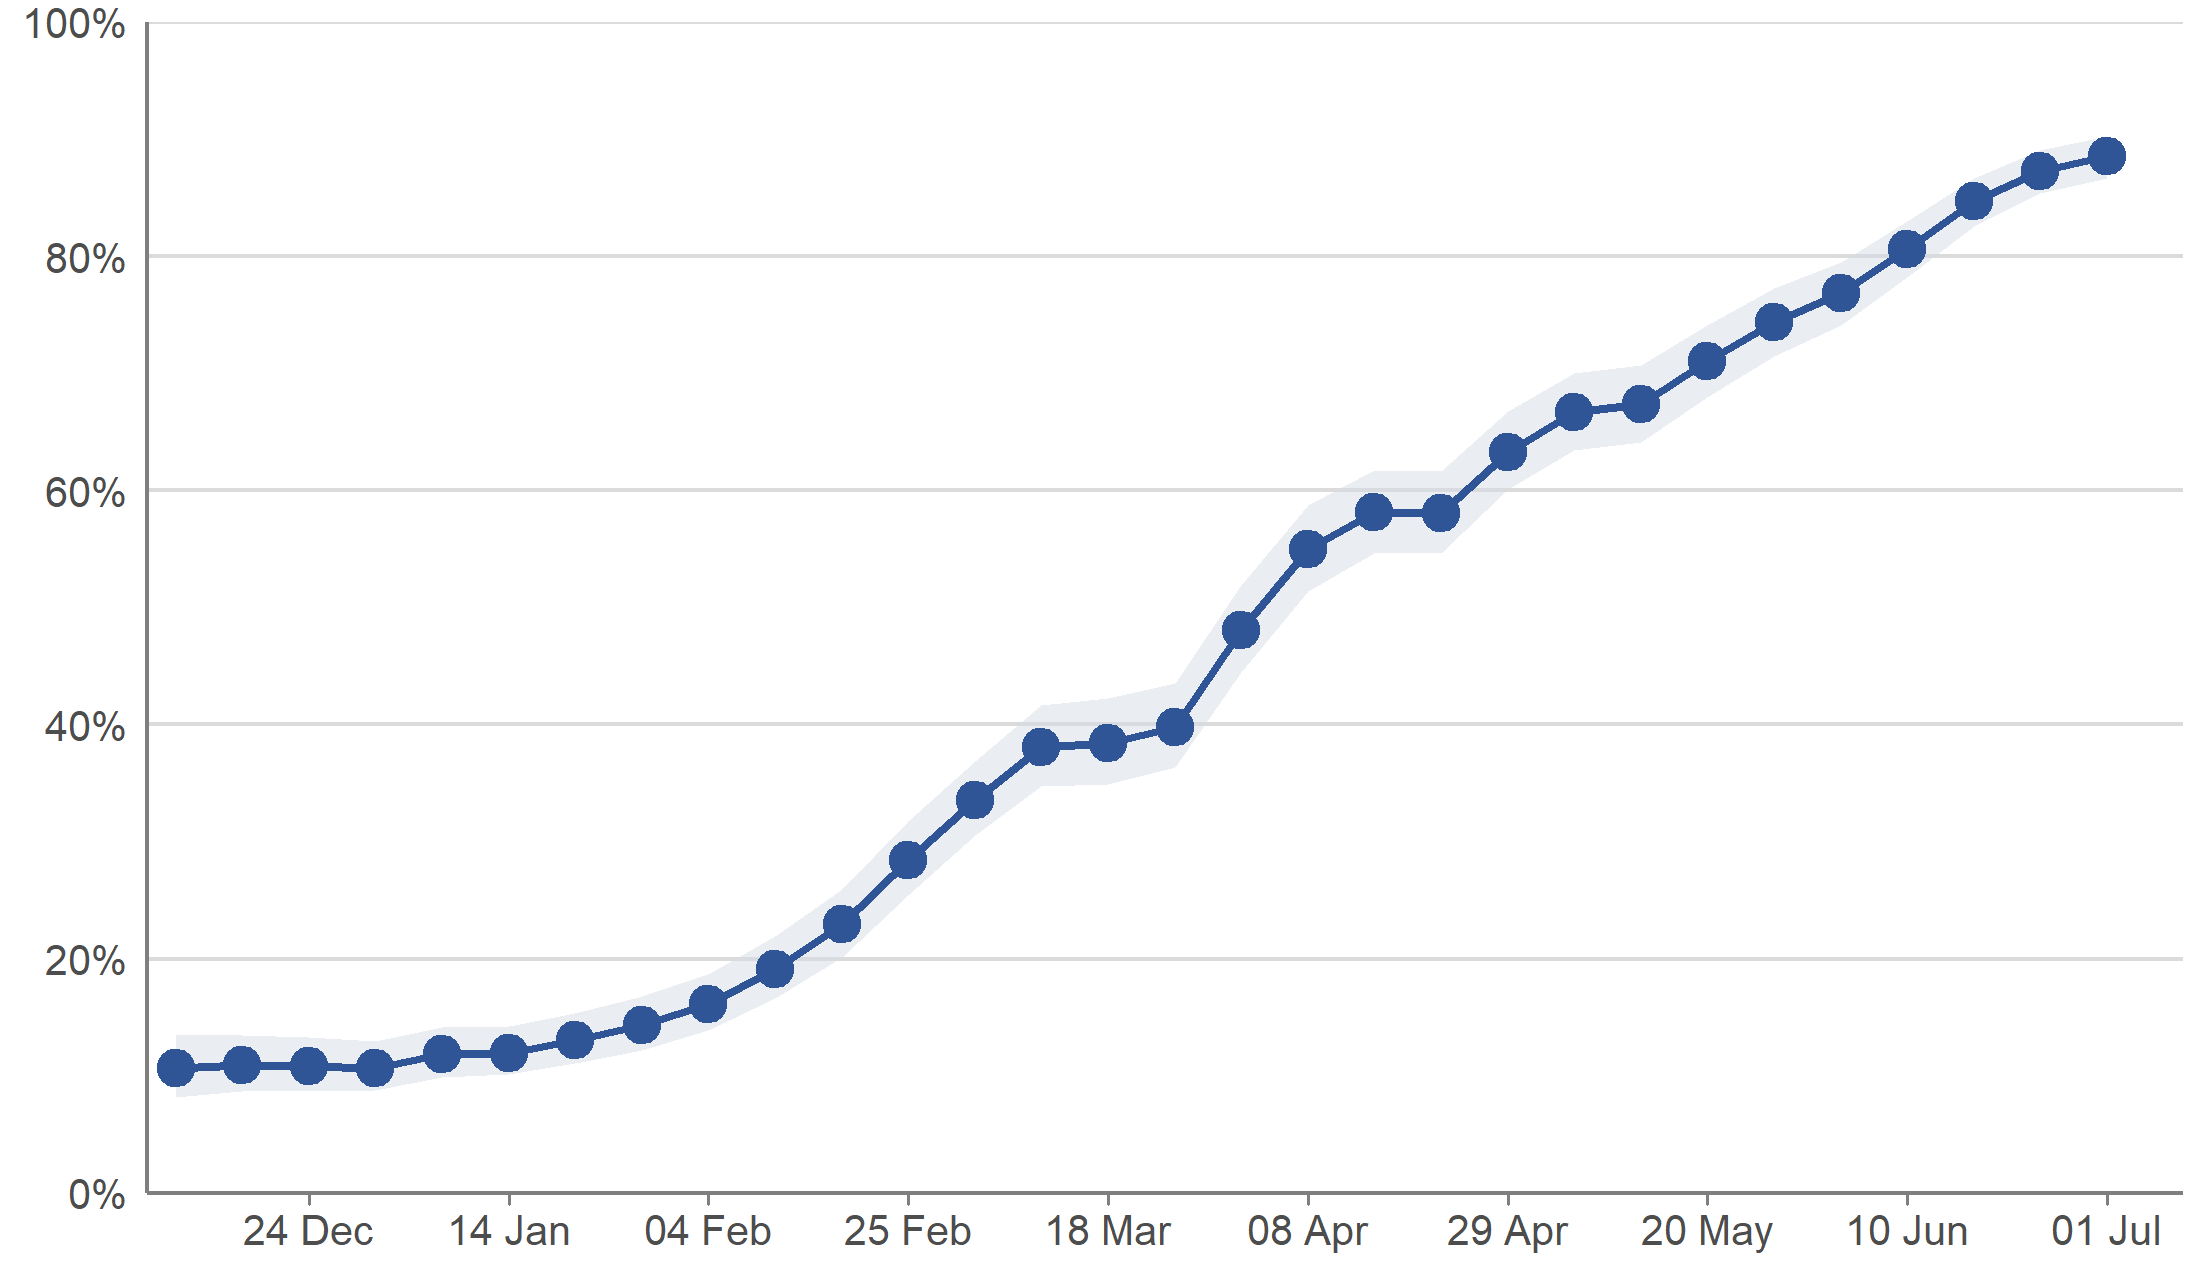 Figure 1: Modelled weekly percentage of people in the adult community population testing positive for antibodies to SARS-CoV-2 from a blood sample, from 7 December 2020 to the week beginning 28 June 2021, including 95% credible intervals